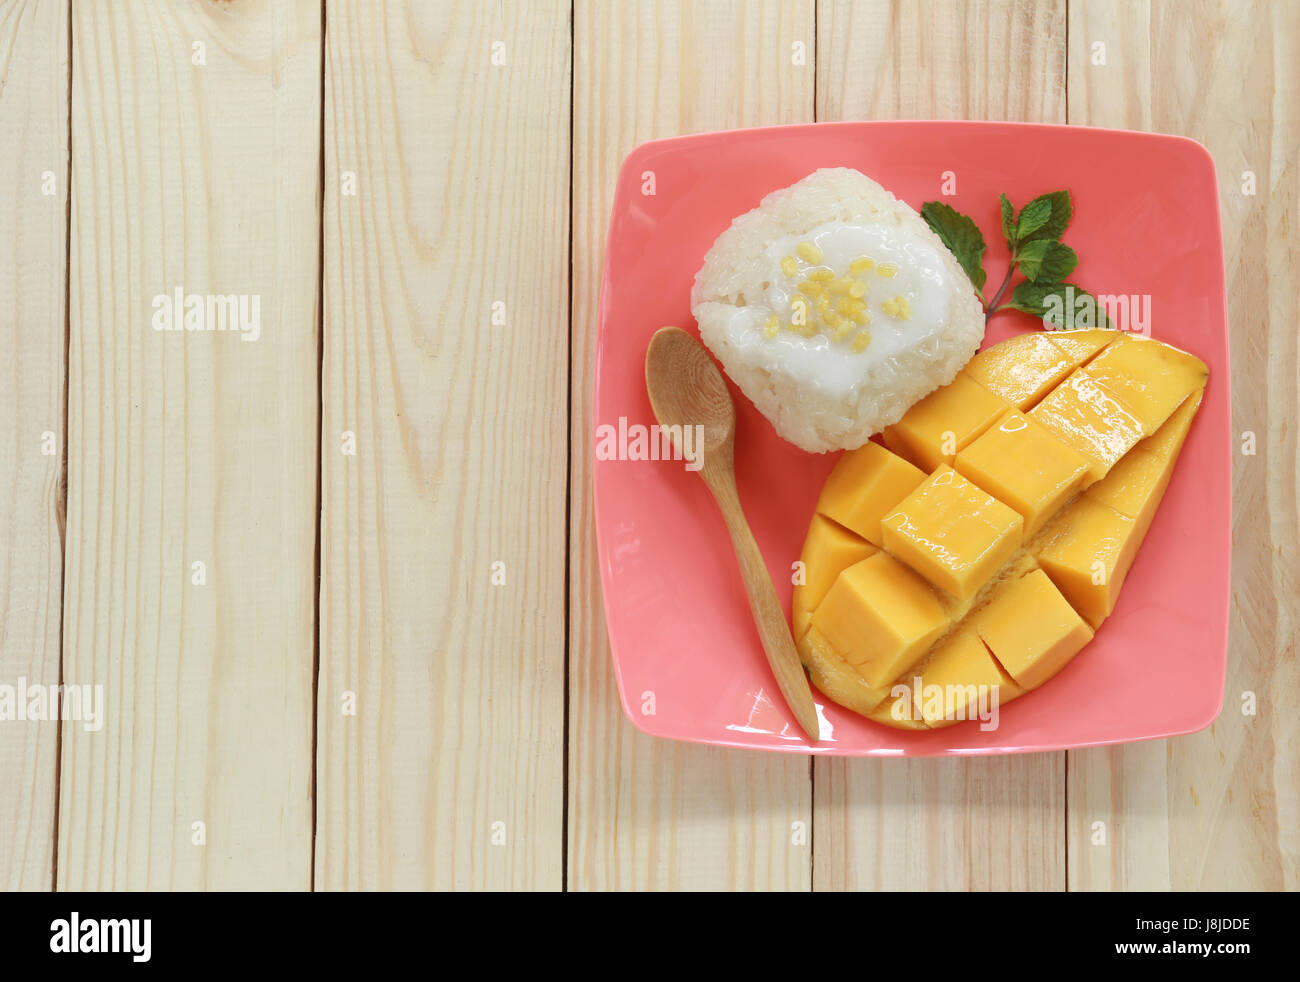 mango and sticky rice on wood background is popular traditional dessert of Thailand. Stock Photo